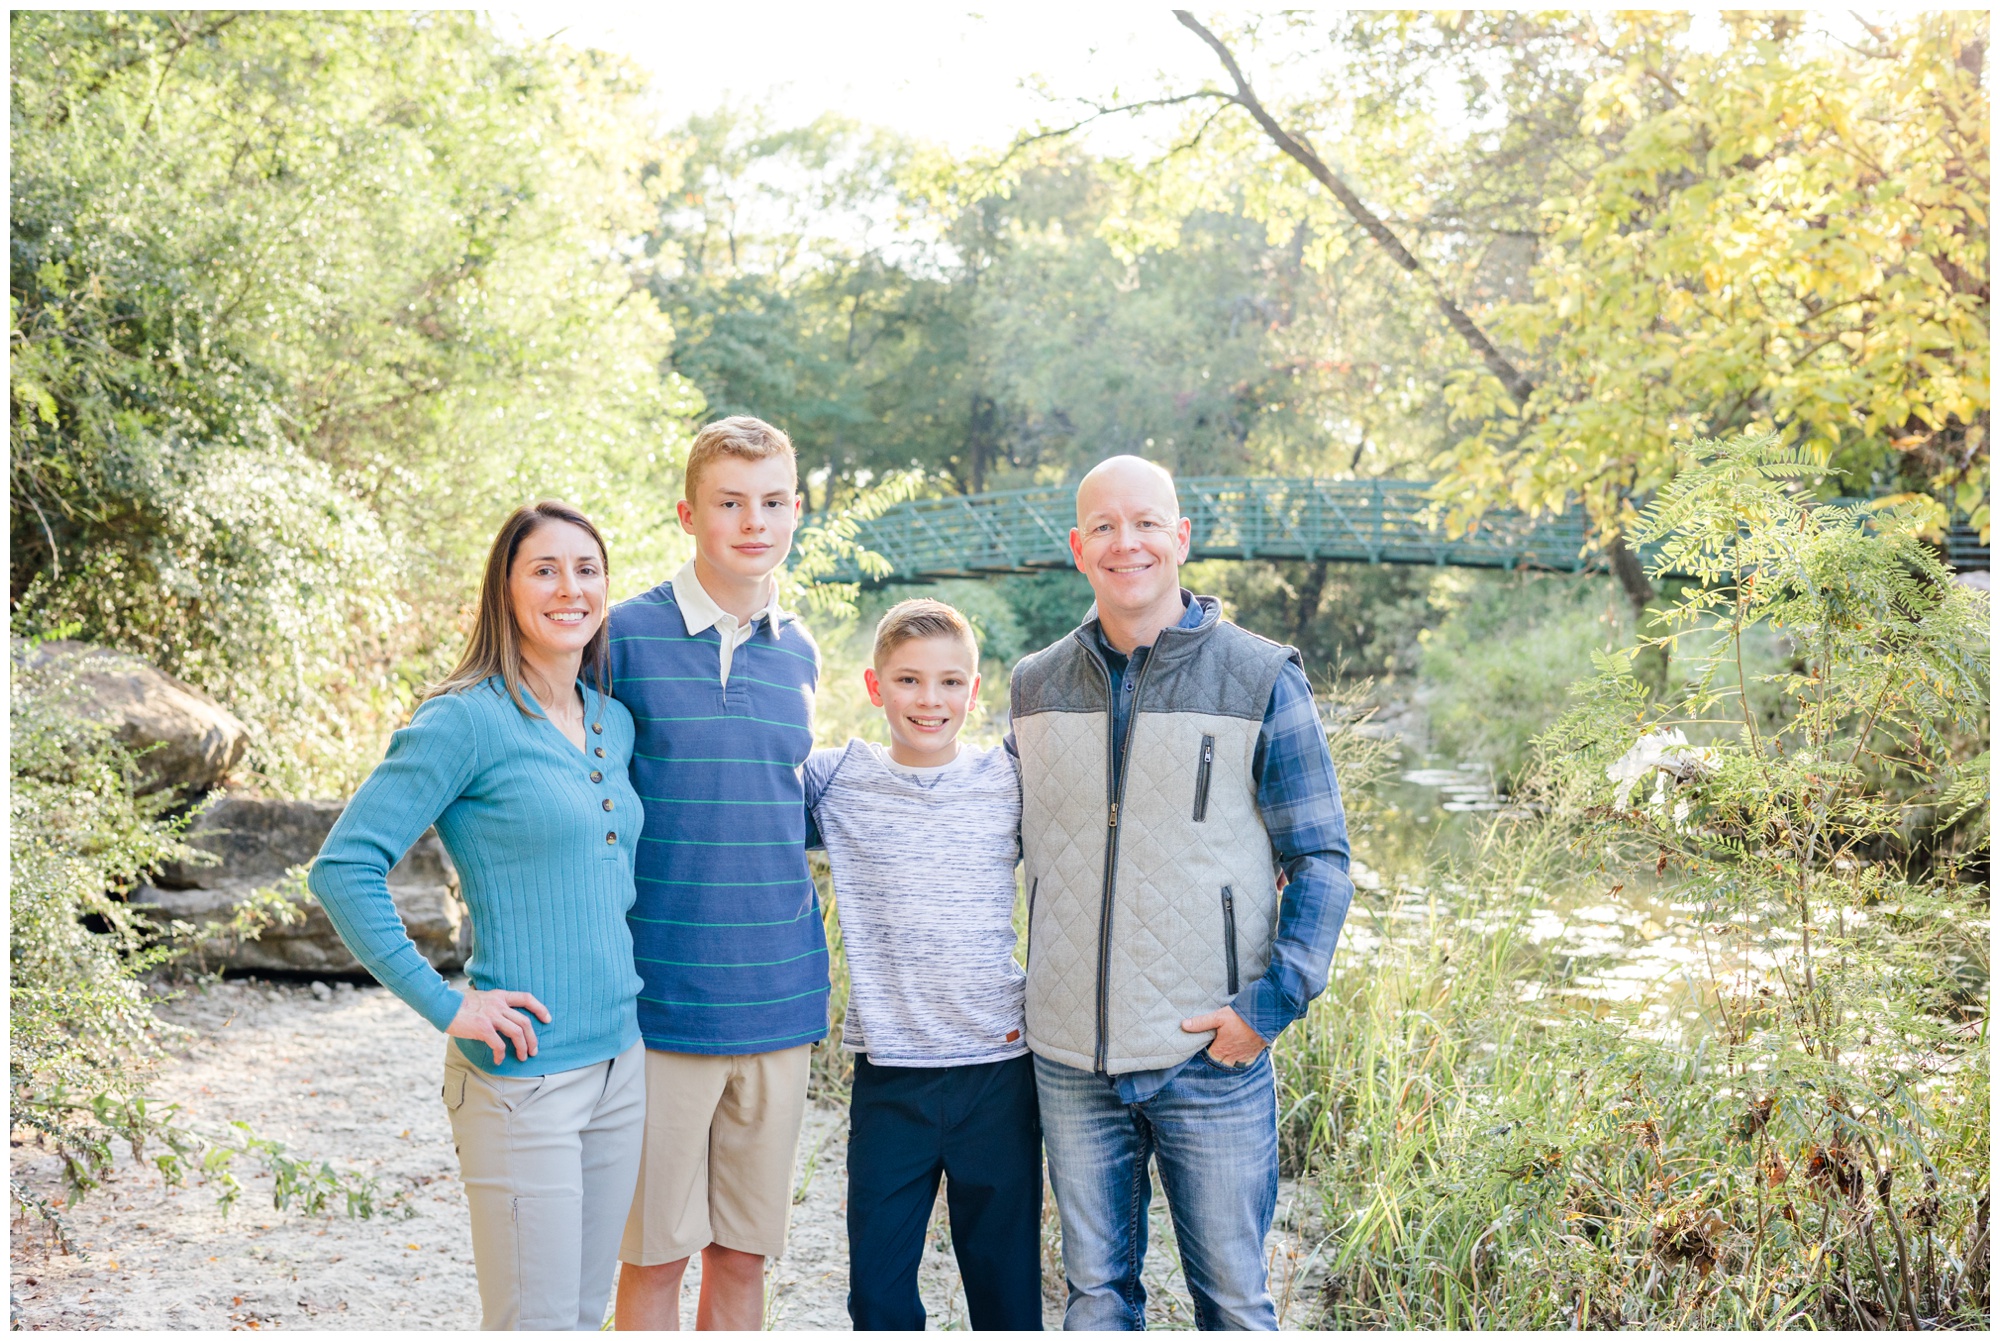 Airfield Falls Family Session | Fort Worth Family Photographer | Lauren Grimes Photography